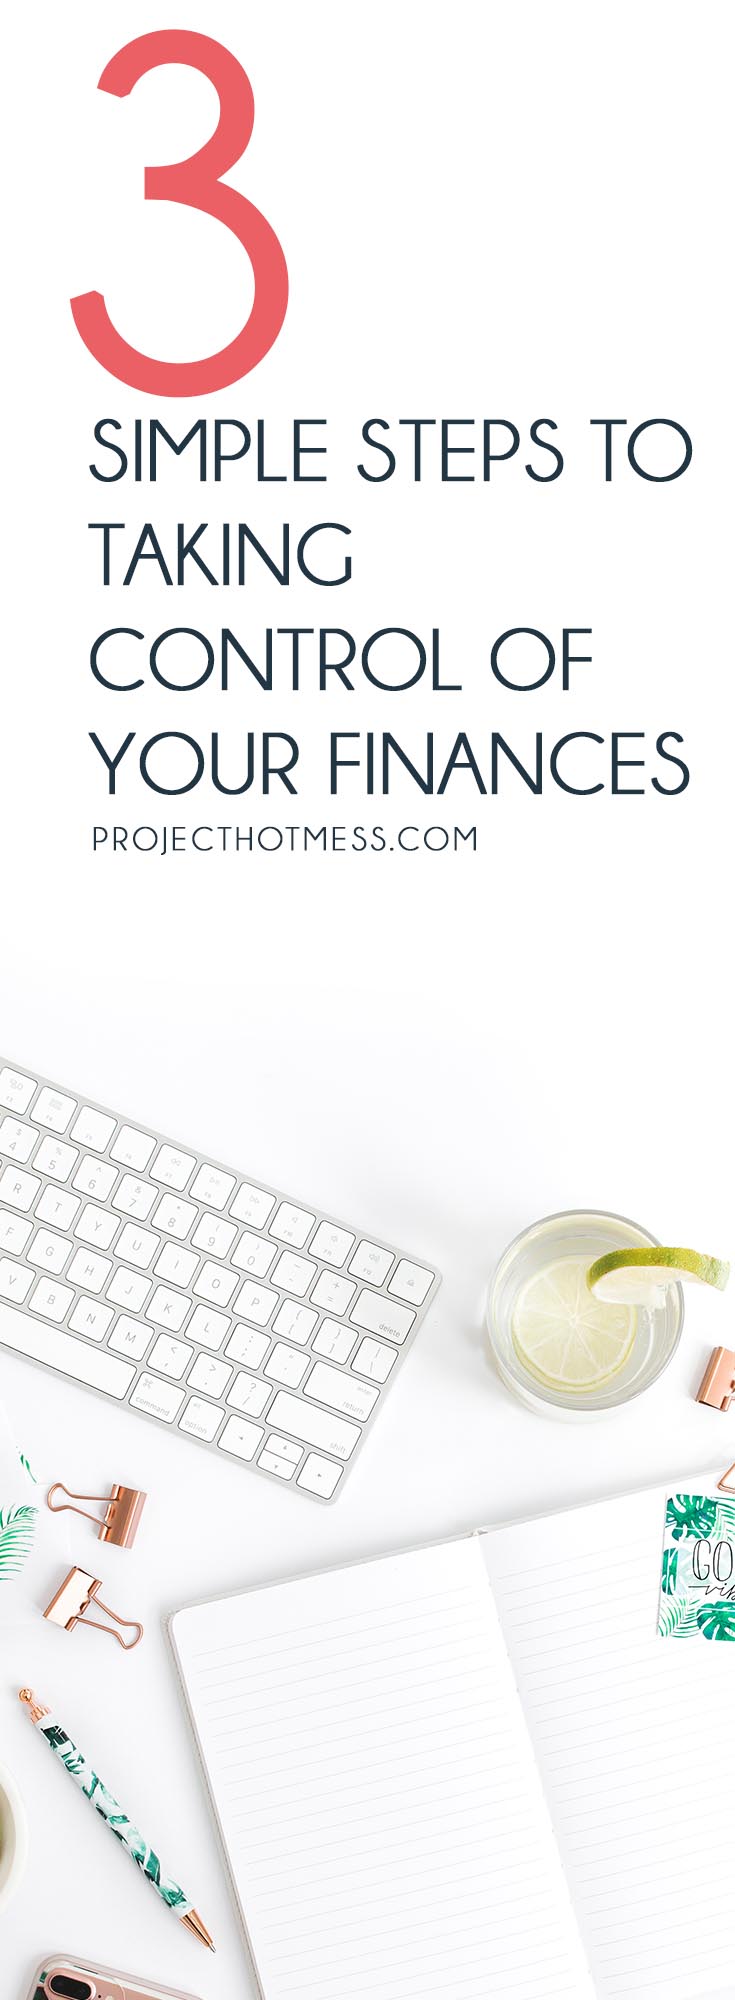 Are you the kind of person that just ignores their financial situation? Use these 3 simple steps to taking control of your finances today, it's so easy. Personal Finance | Money | Money Goals | Budgeting | Budgeting Goals | Budgeting Ideas | Finances | Financial Planning | Money Mindset | Positive Money Mindset | Financial Control